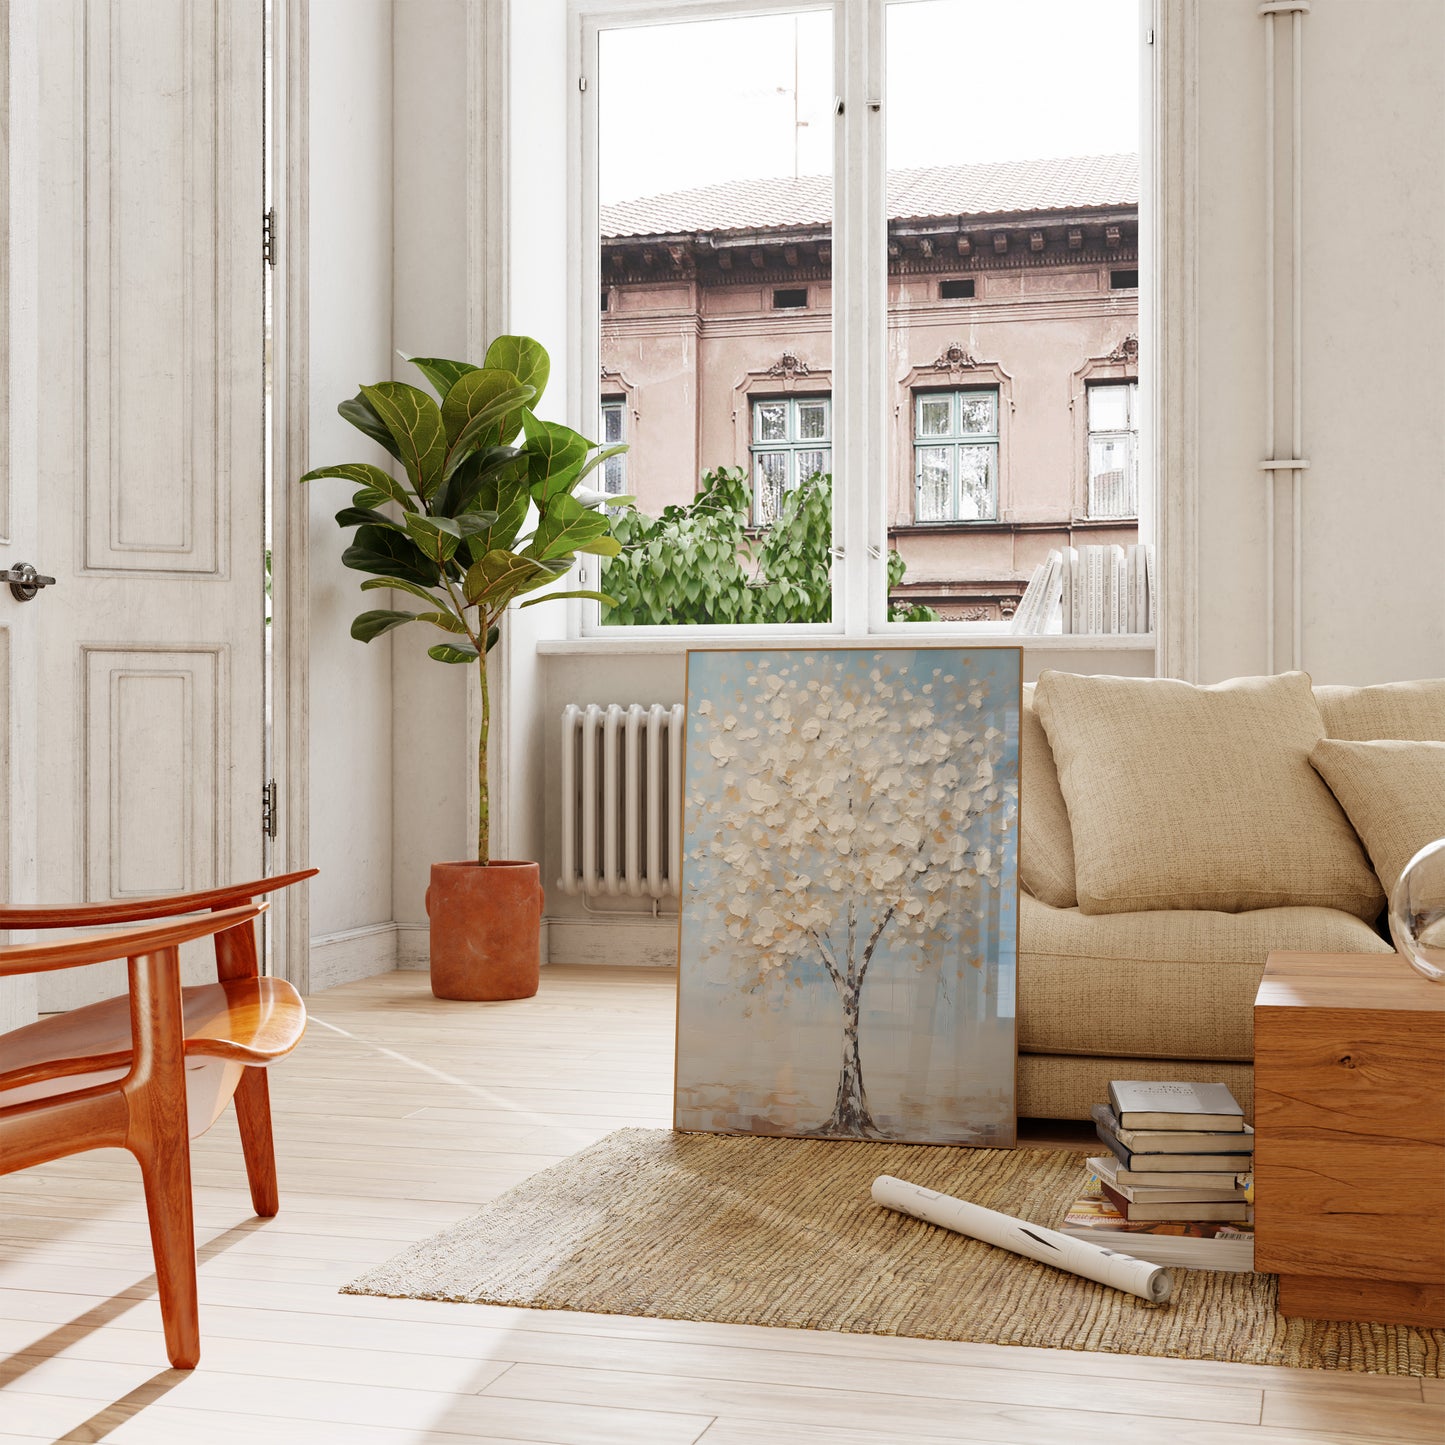 A cozy living room with a couch, artwork, and a potted plant by an open door.